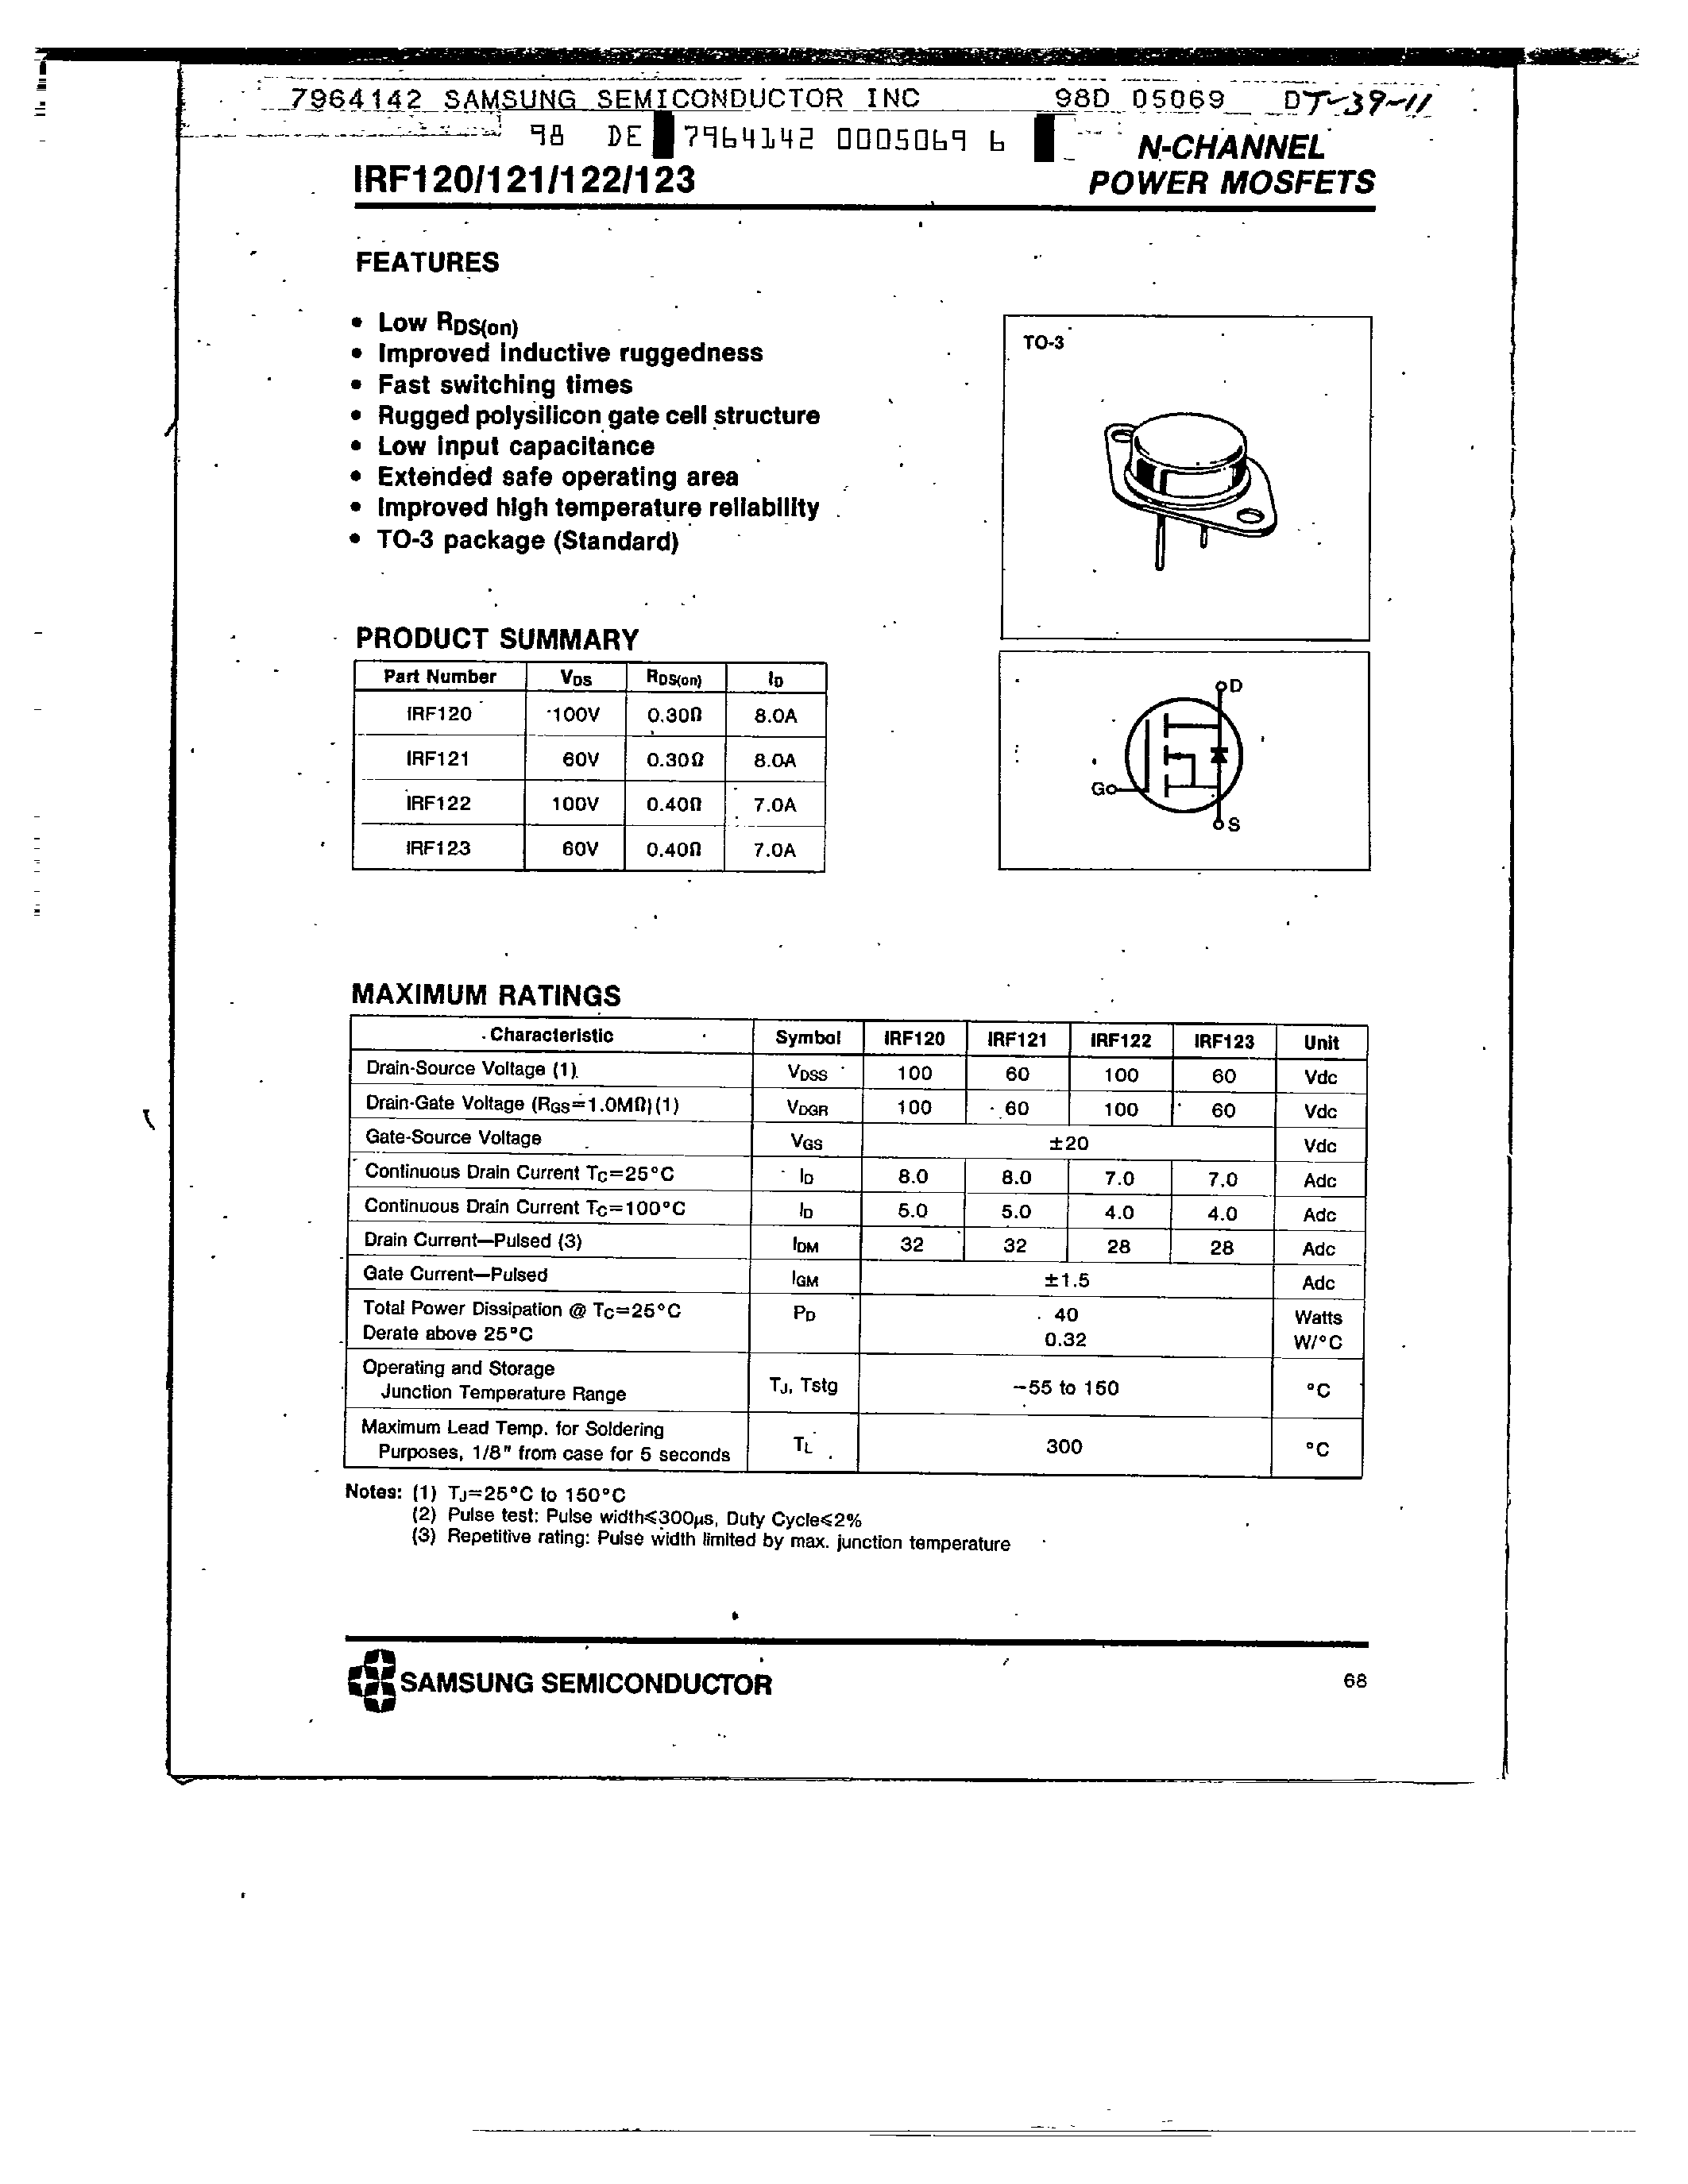 Datasheet IRF120 - N-CHANNEL POWER MOSFETS page 1